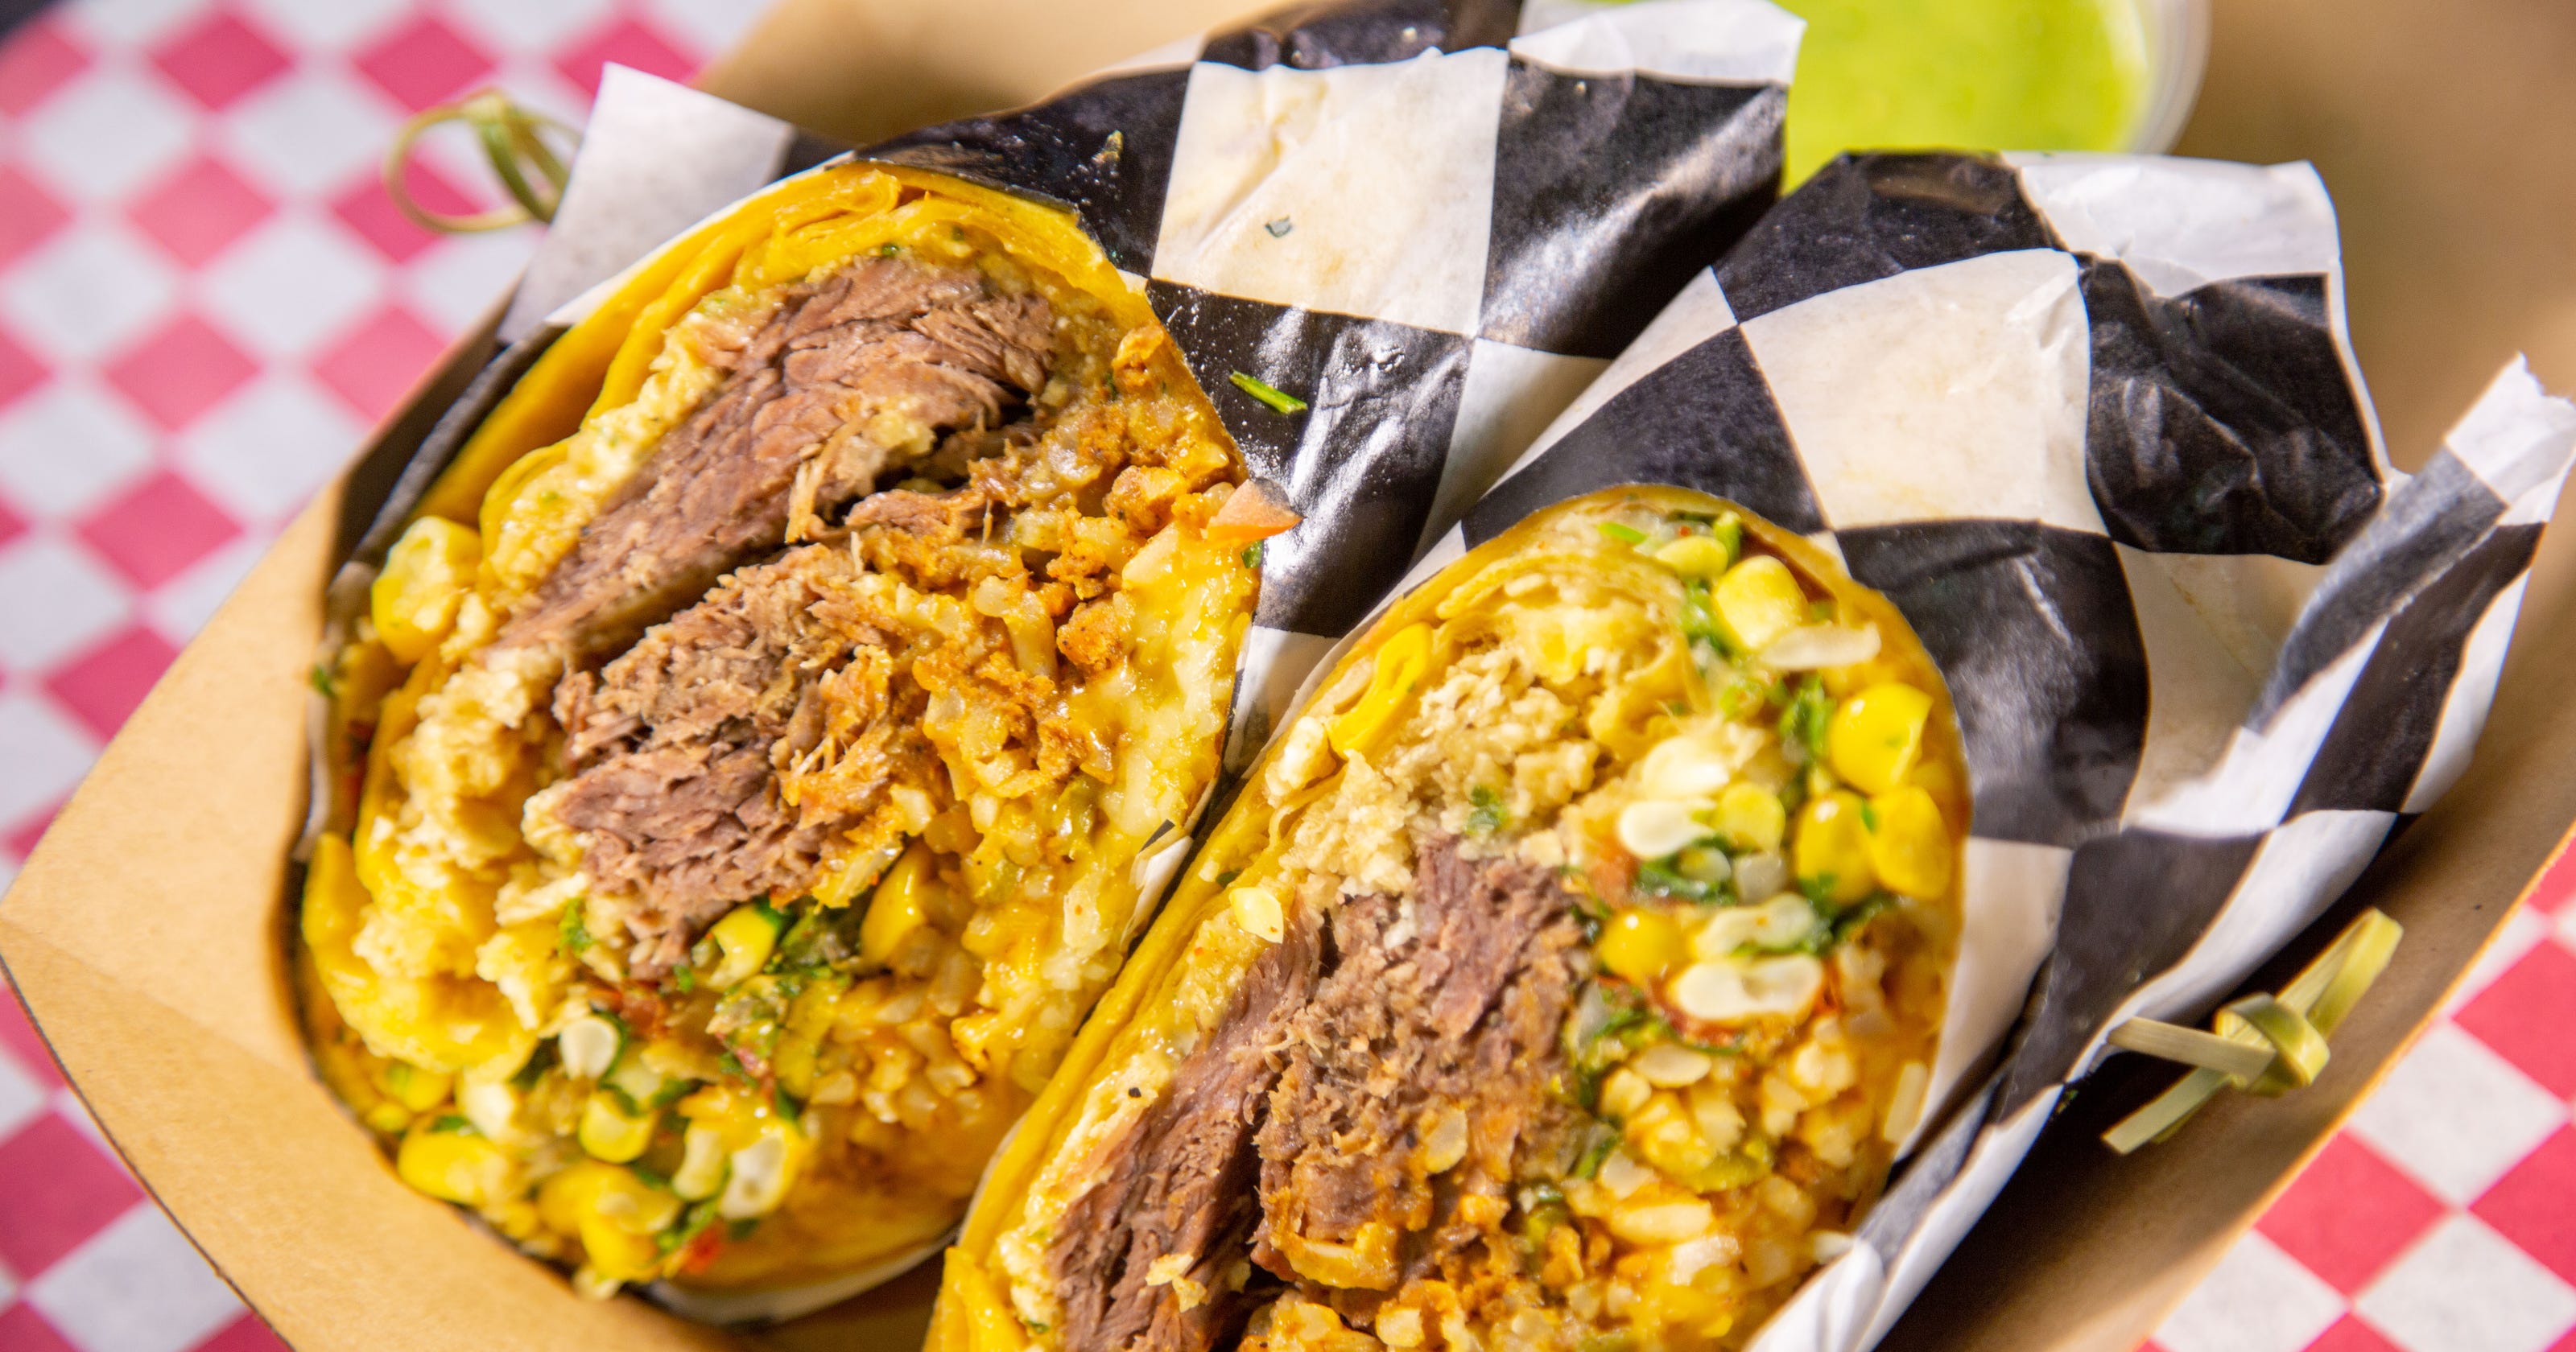 Iowa State Fair: The best new foods for 2019 include pot roast wrap and beef brisket